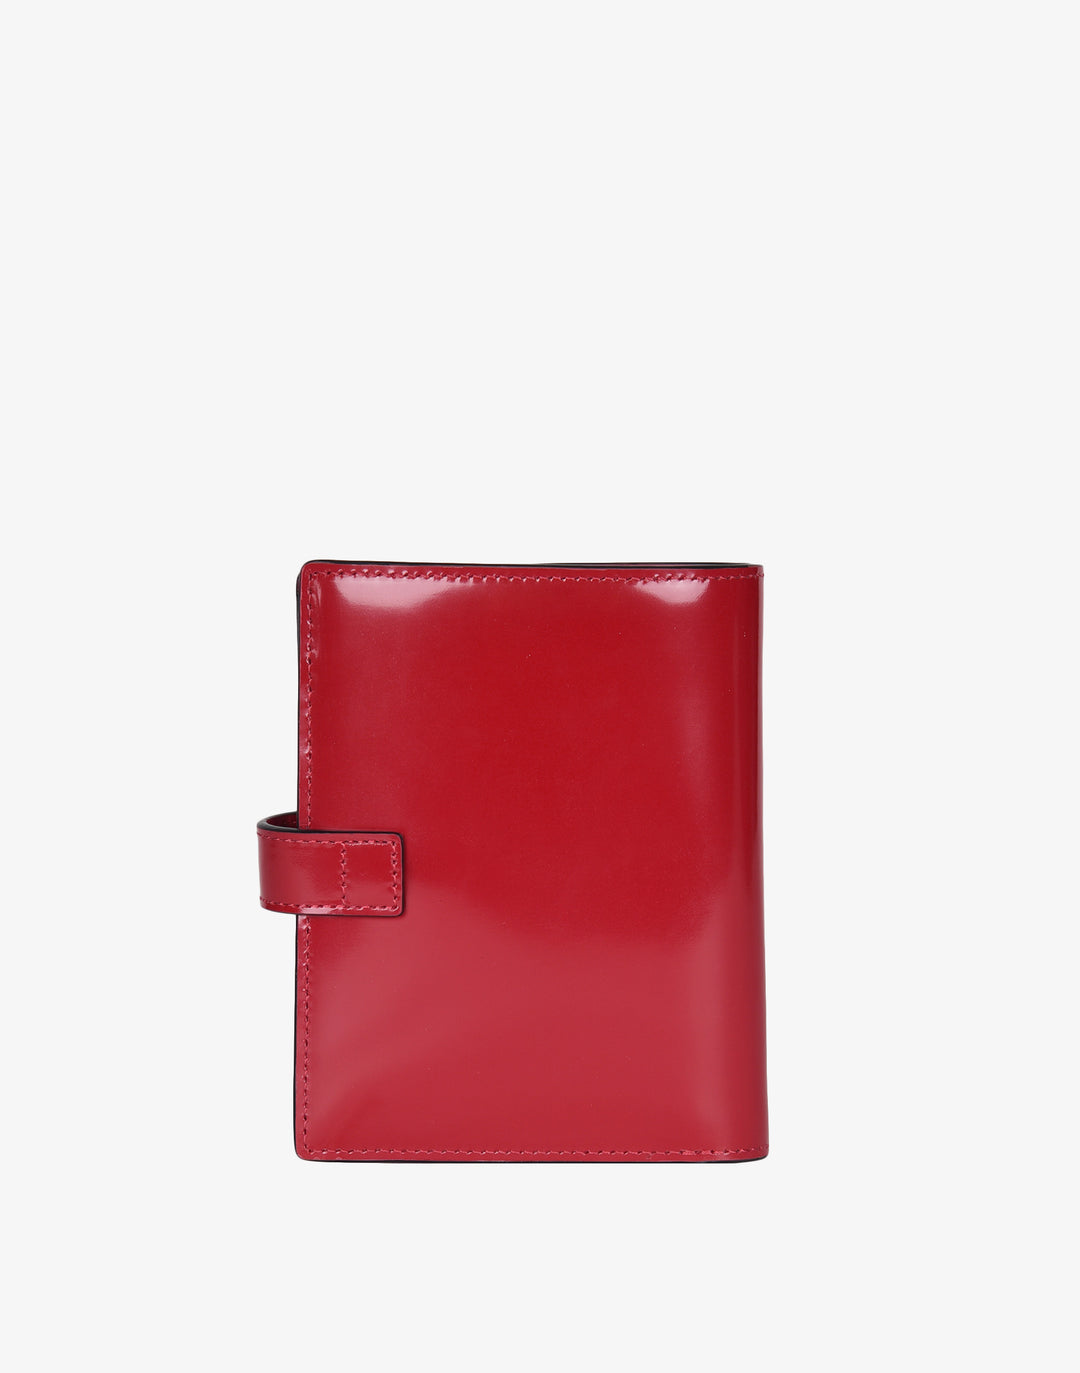 hyer goods recycled leather travel passport wallet red patent#color_glazed-red